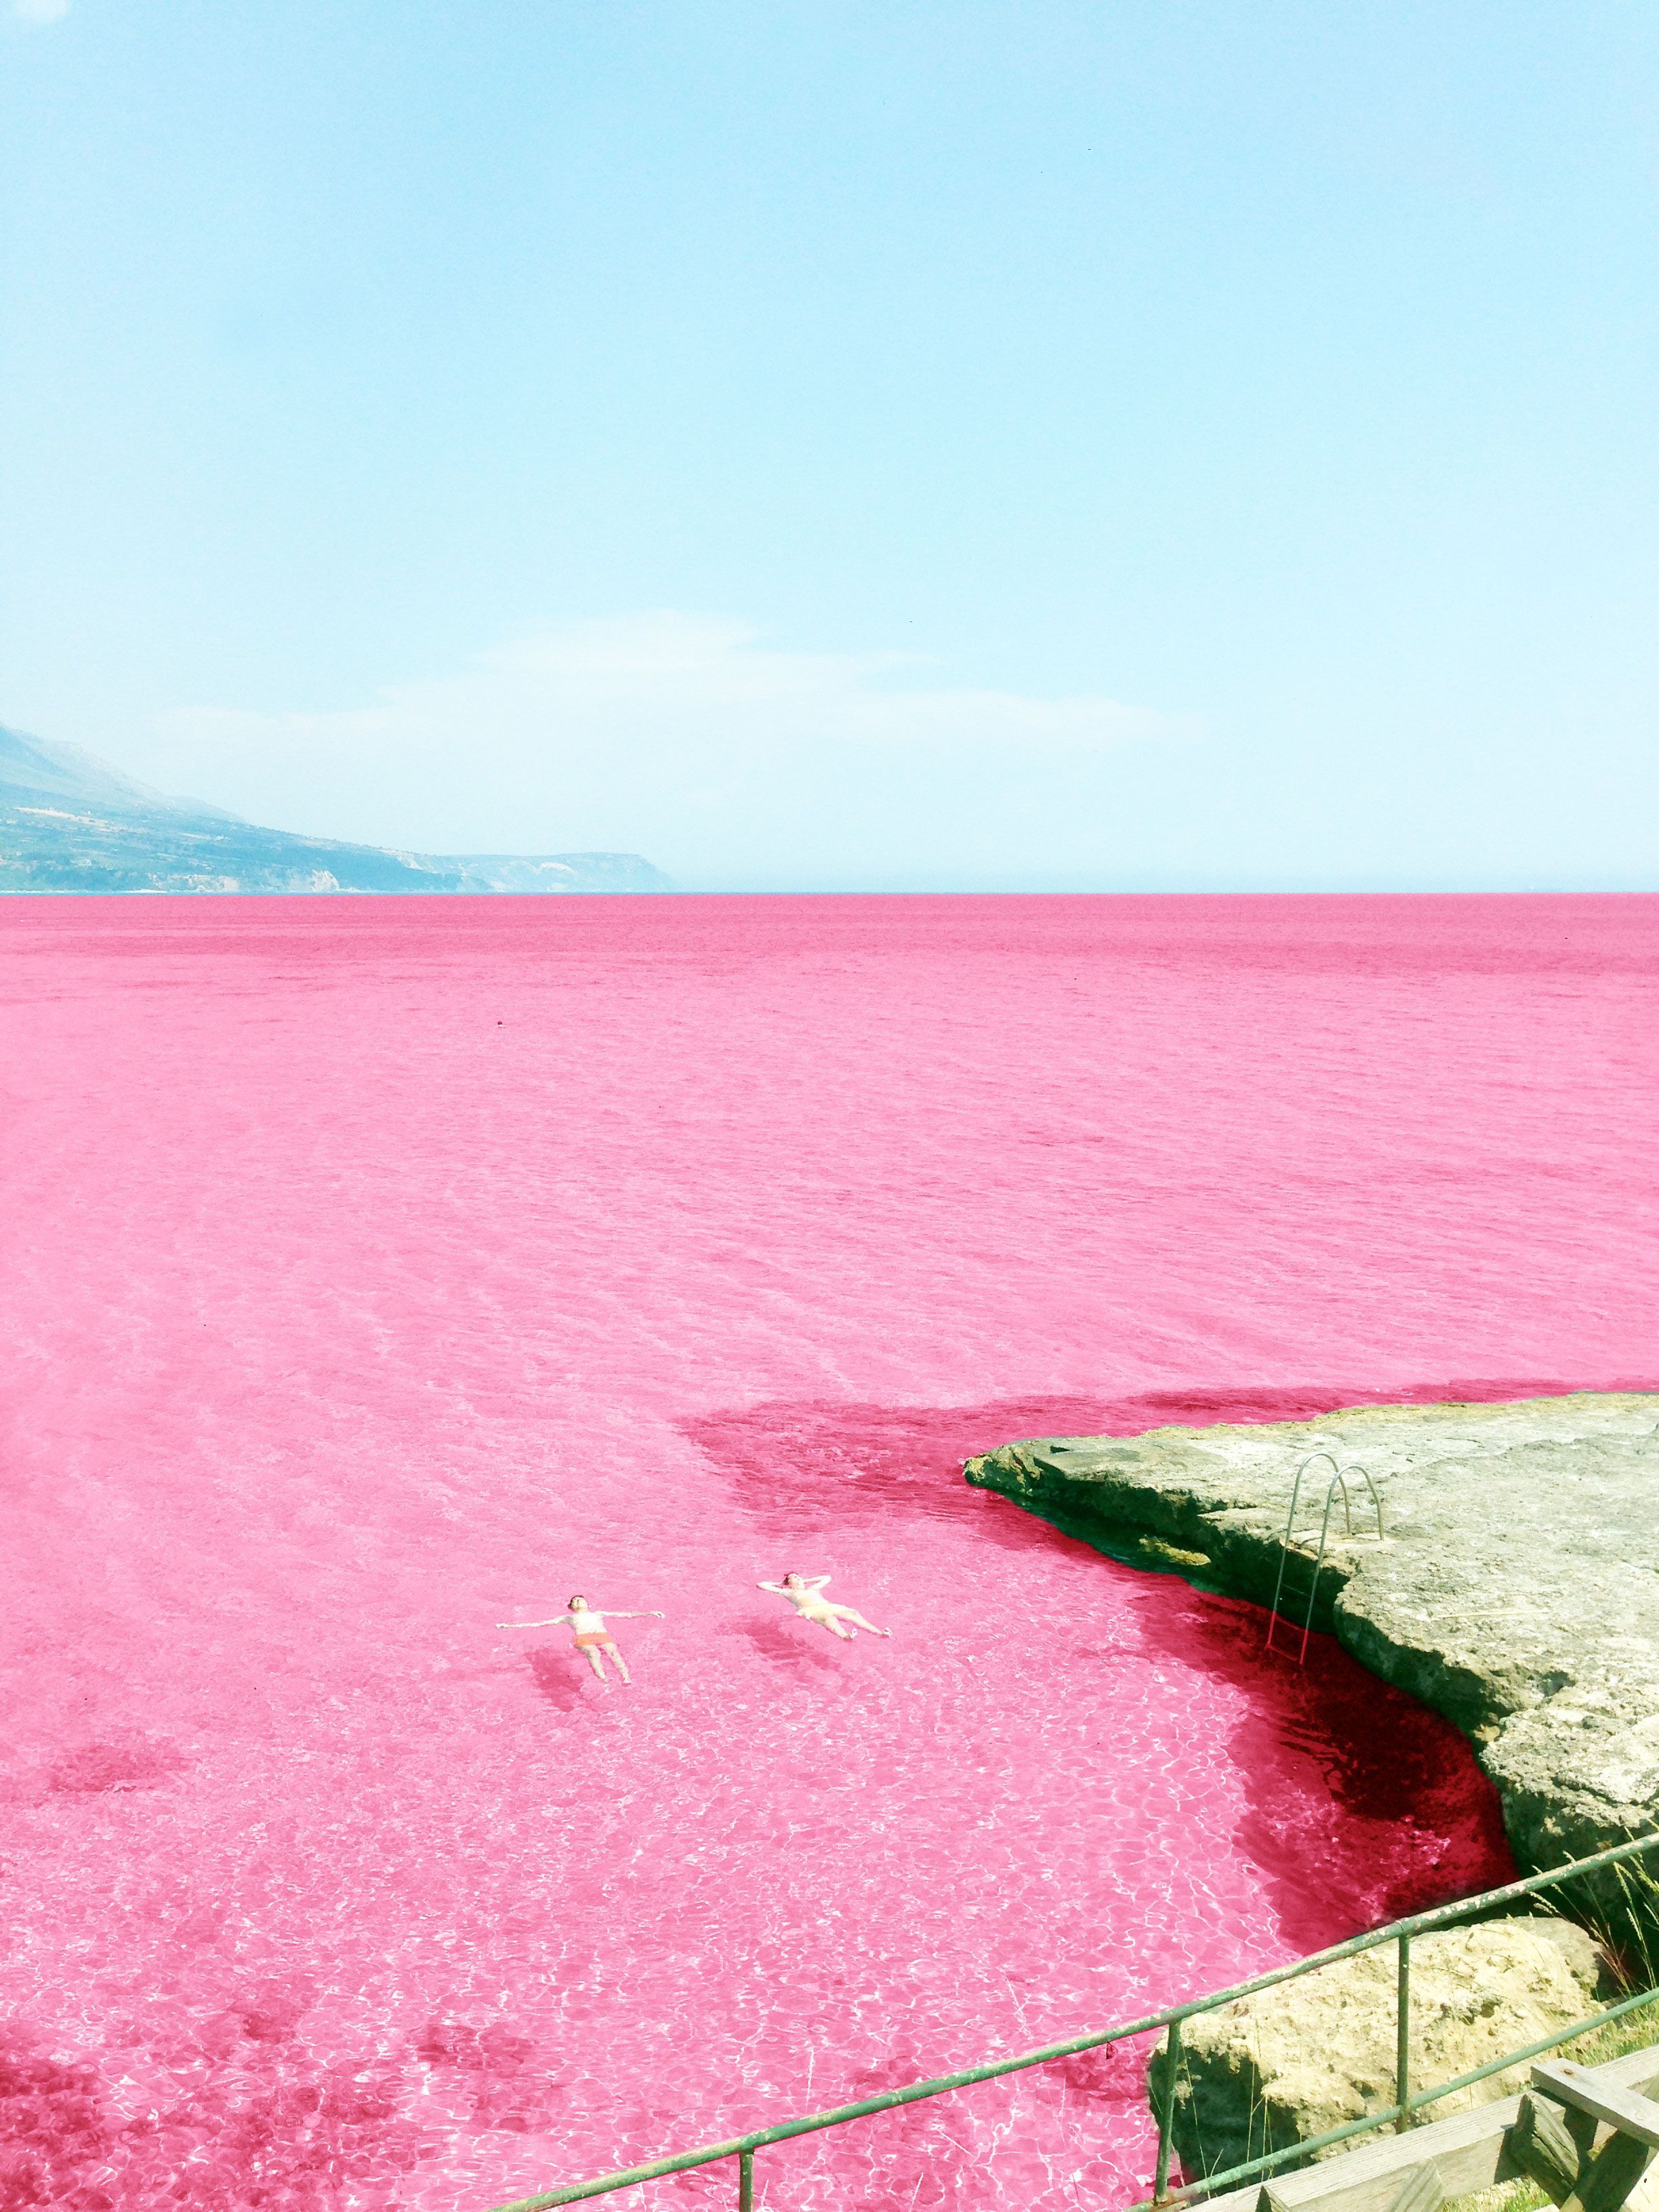 A new Era begins. Back with you shortly. Lake hillier, Beautiful places, Places to travel